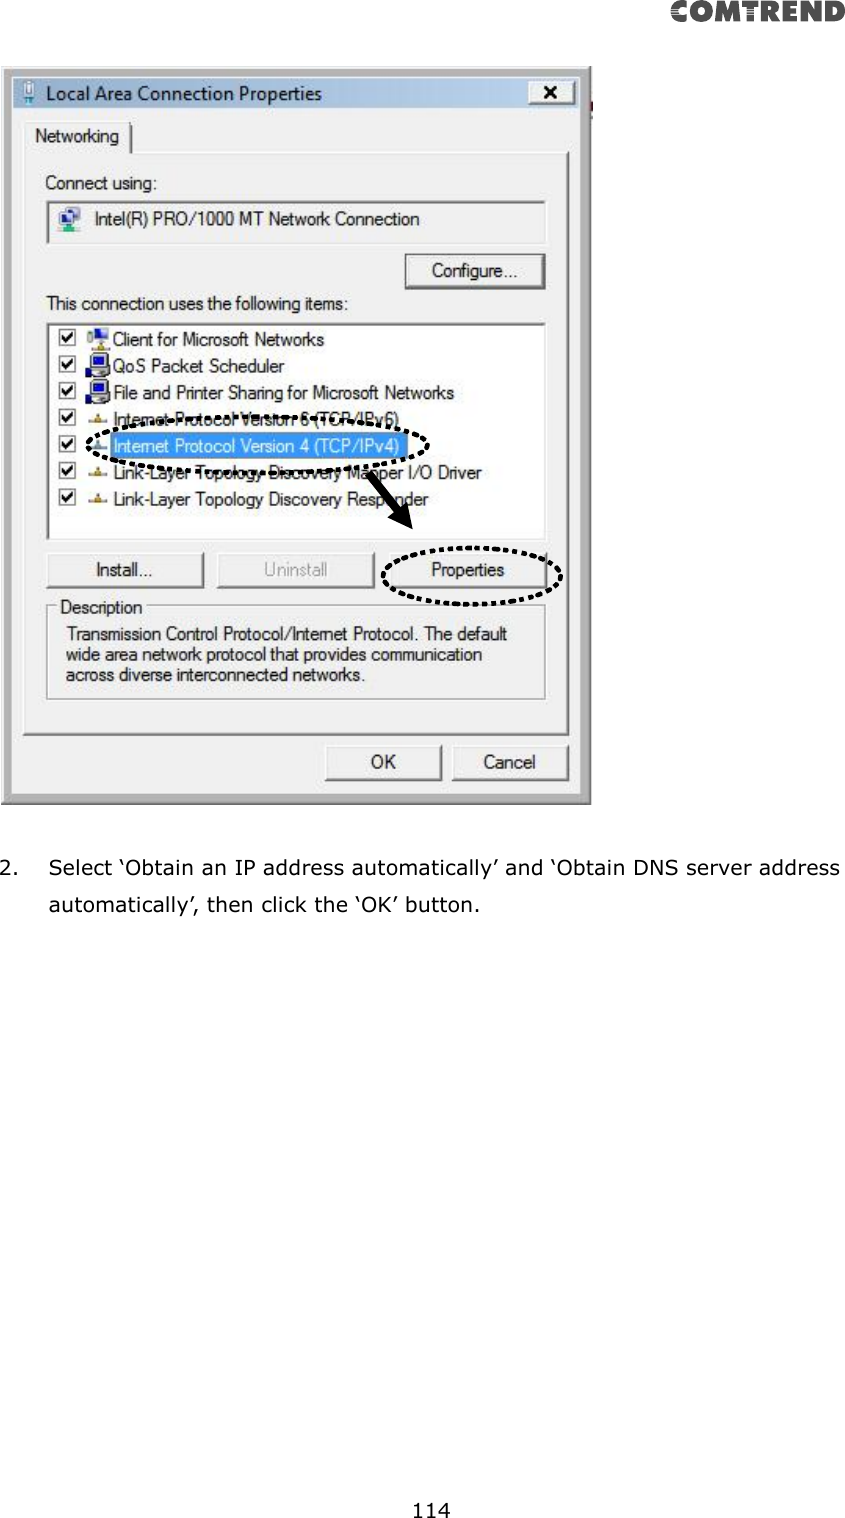       114    2. Select ‘Obtain an IP address automatically’ and ‘Obtain DNS server address automatically’, then click the ‘OK’ button.  